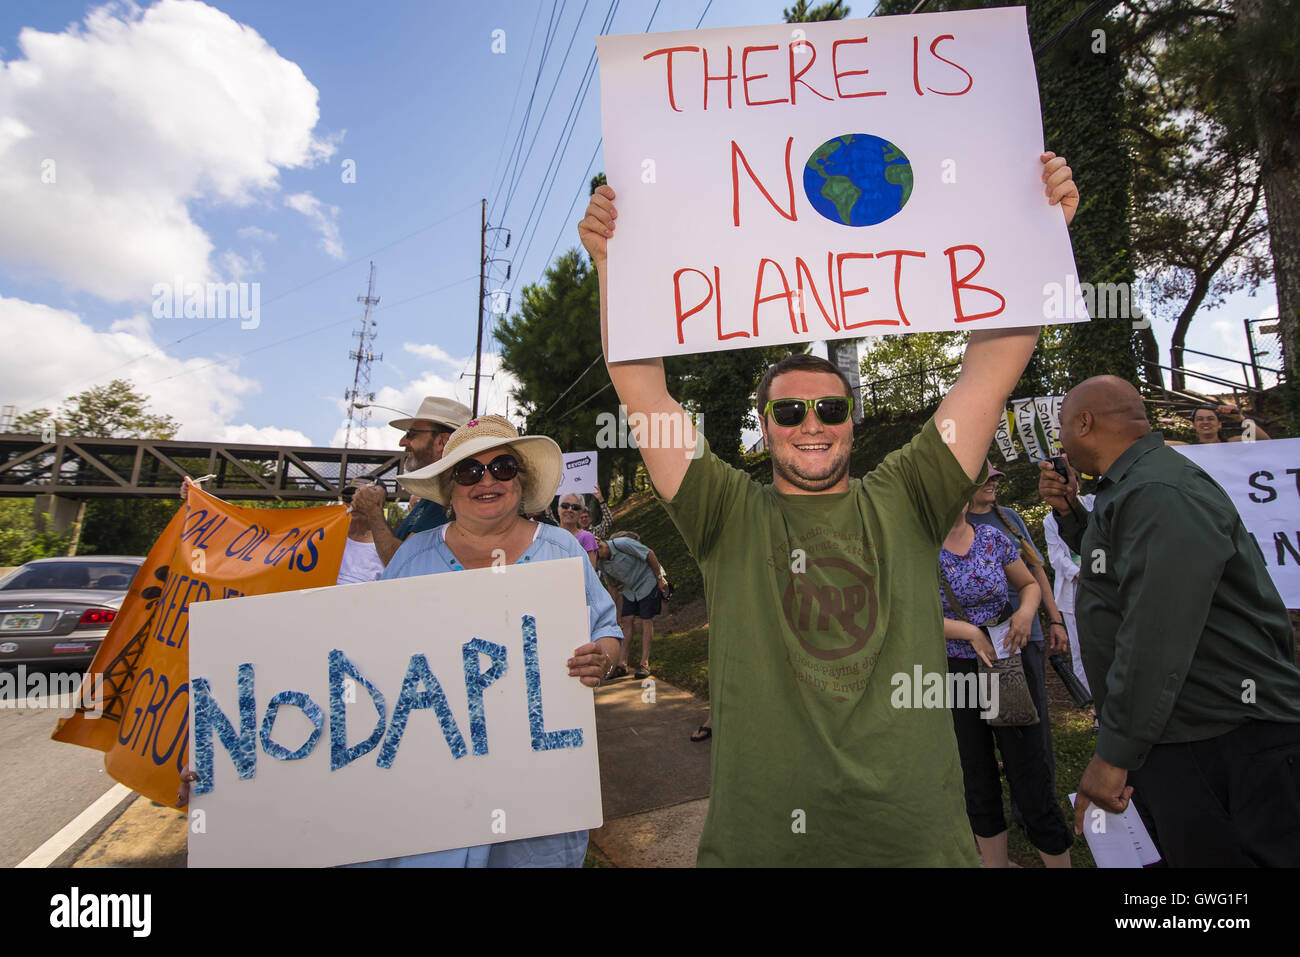 Decatur, Georgia, USA. 13th Sep, 2016. The Georgia Chapter of the Sierra Club holds a rally in Decatur, Georgia to demonstrate opposition to the building of the Dakota Access Pipeline and show support for the indigenous leaders in North Dakota who are protesting against its construction. The organizers of the rally call on President Obama to instruct the Army Corps of Engineers to revoke the construction permits for the oil pipeline. Credit:  Steve Eberhardt/ZUMA Wire/Alamy Live News Stock Photo